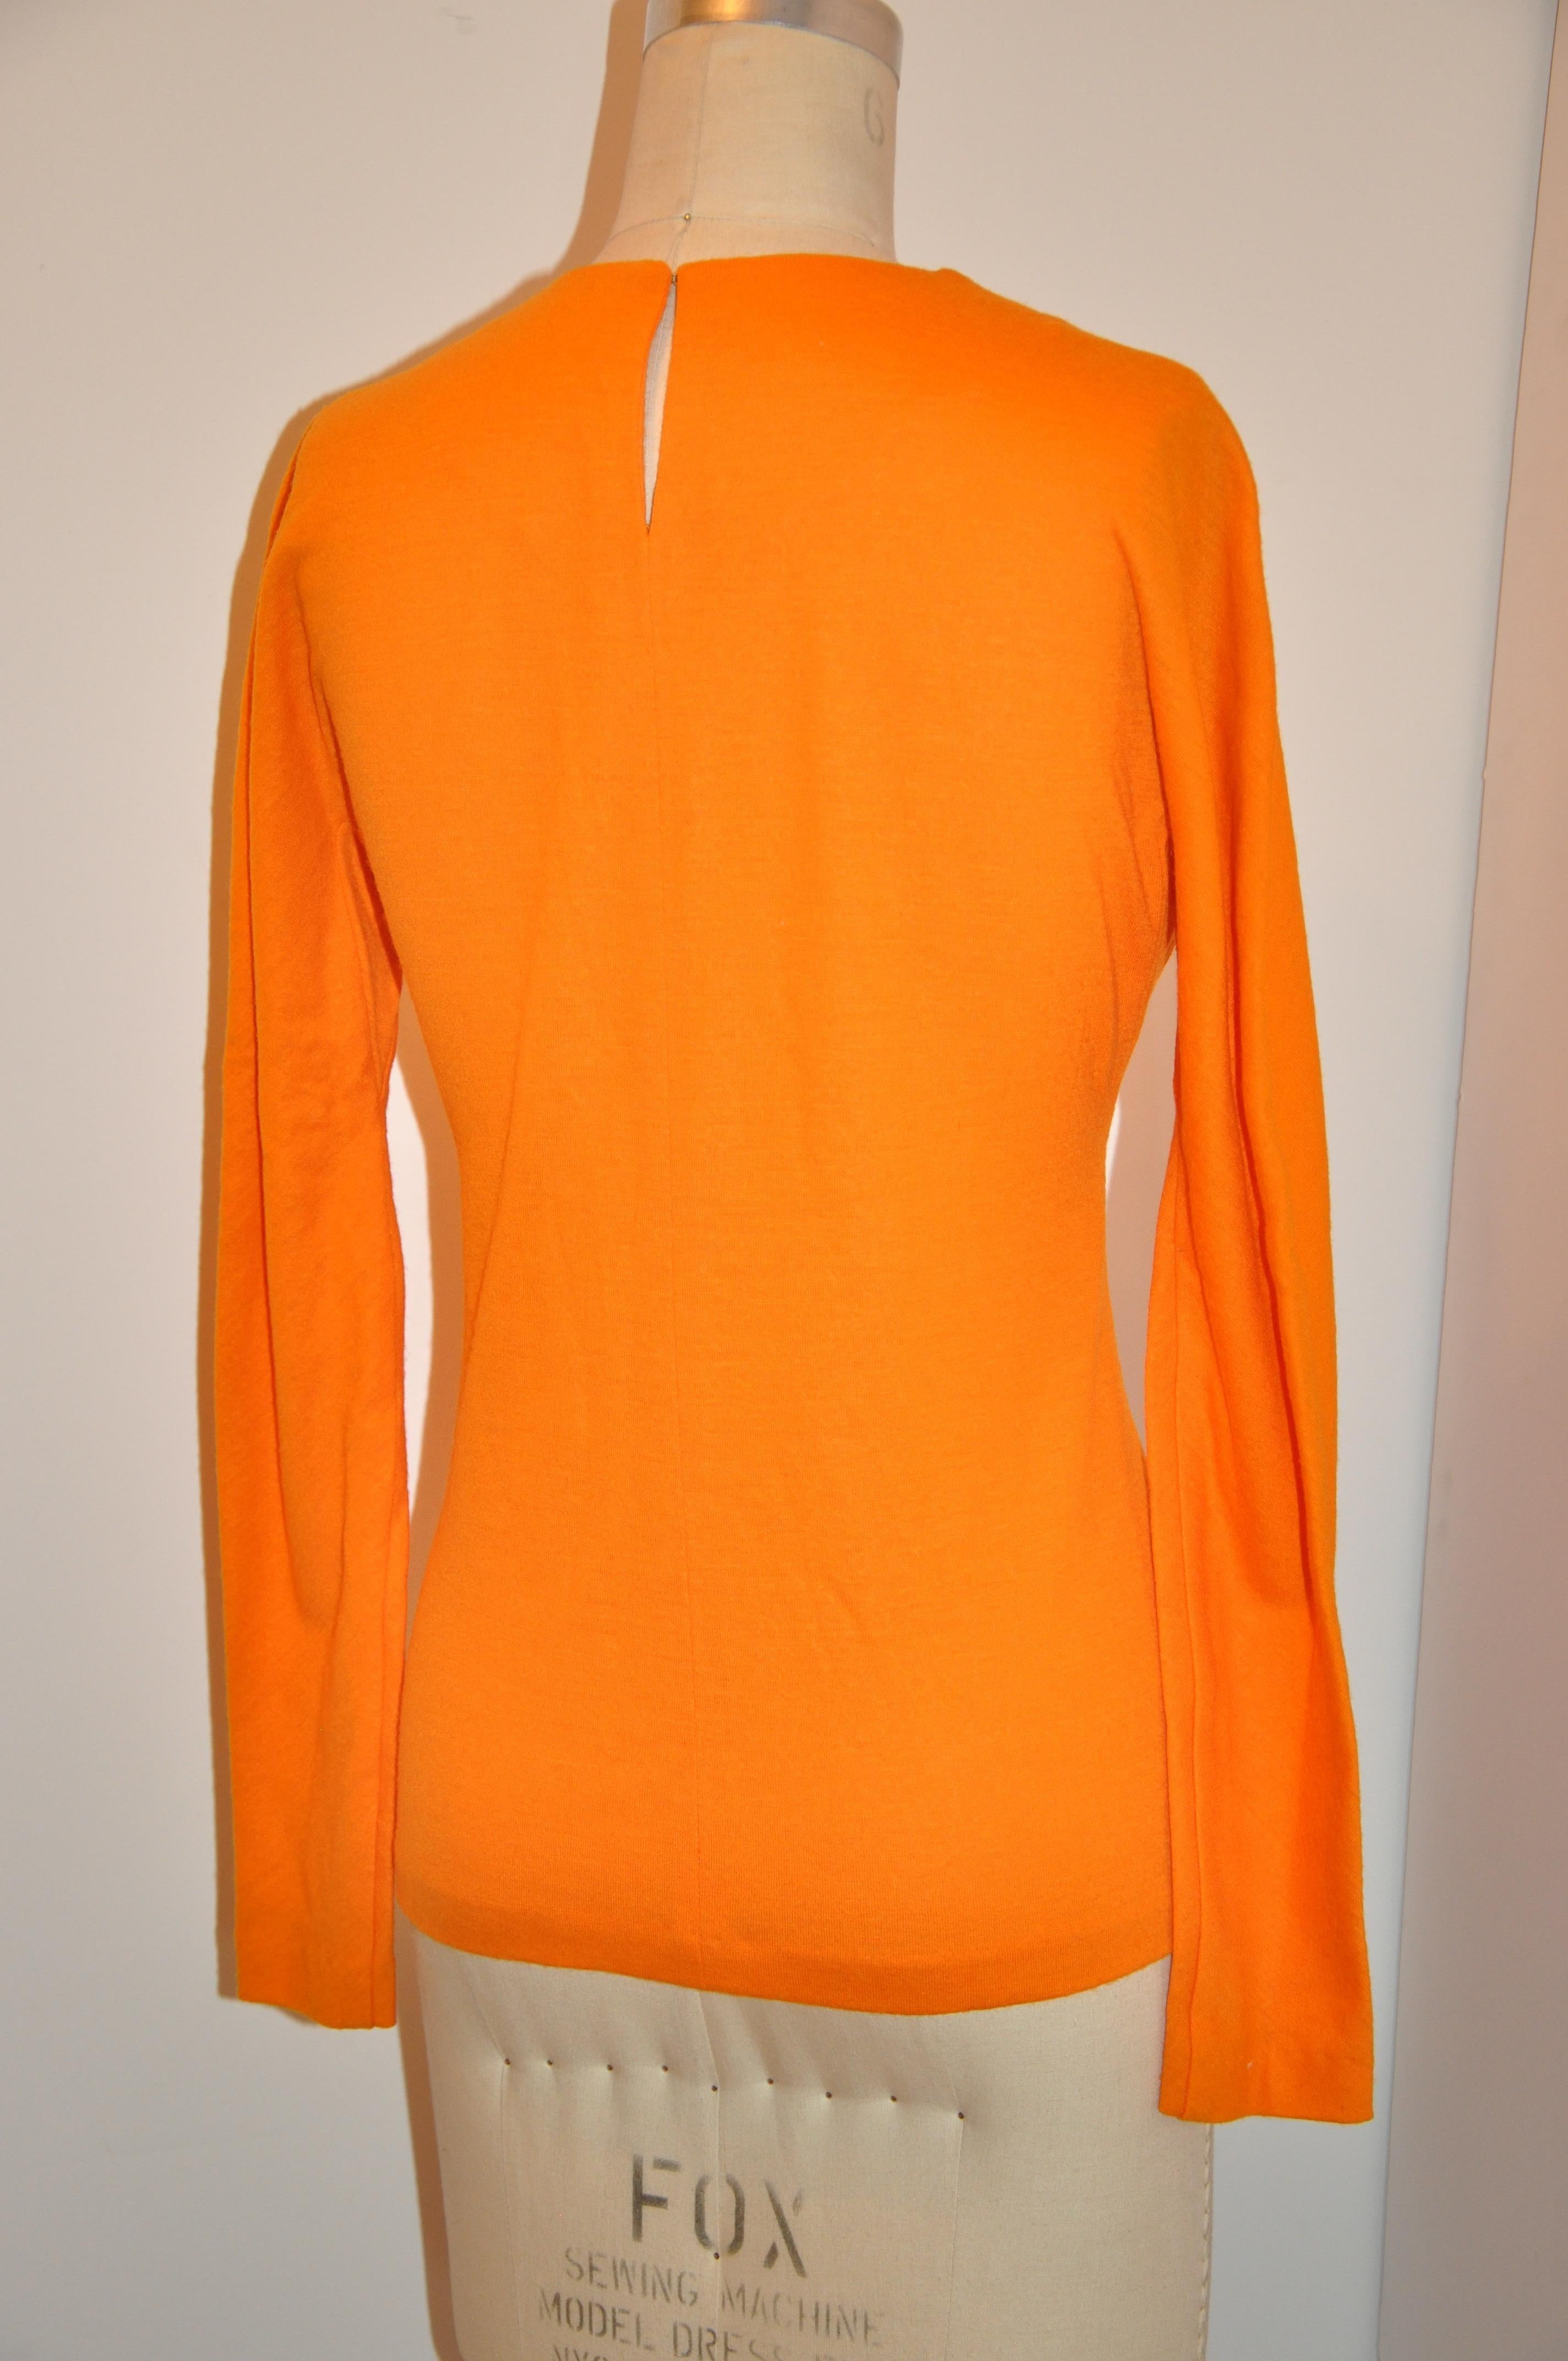 Rare Stephen Sprouse Warm Tangerine Wool Jersey Pullover Top For Sale 1